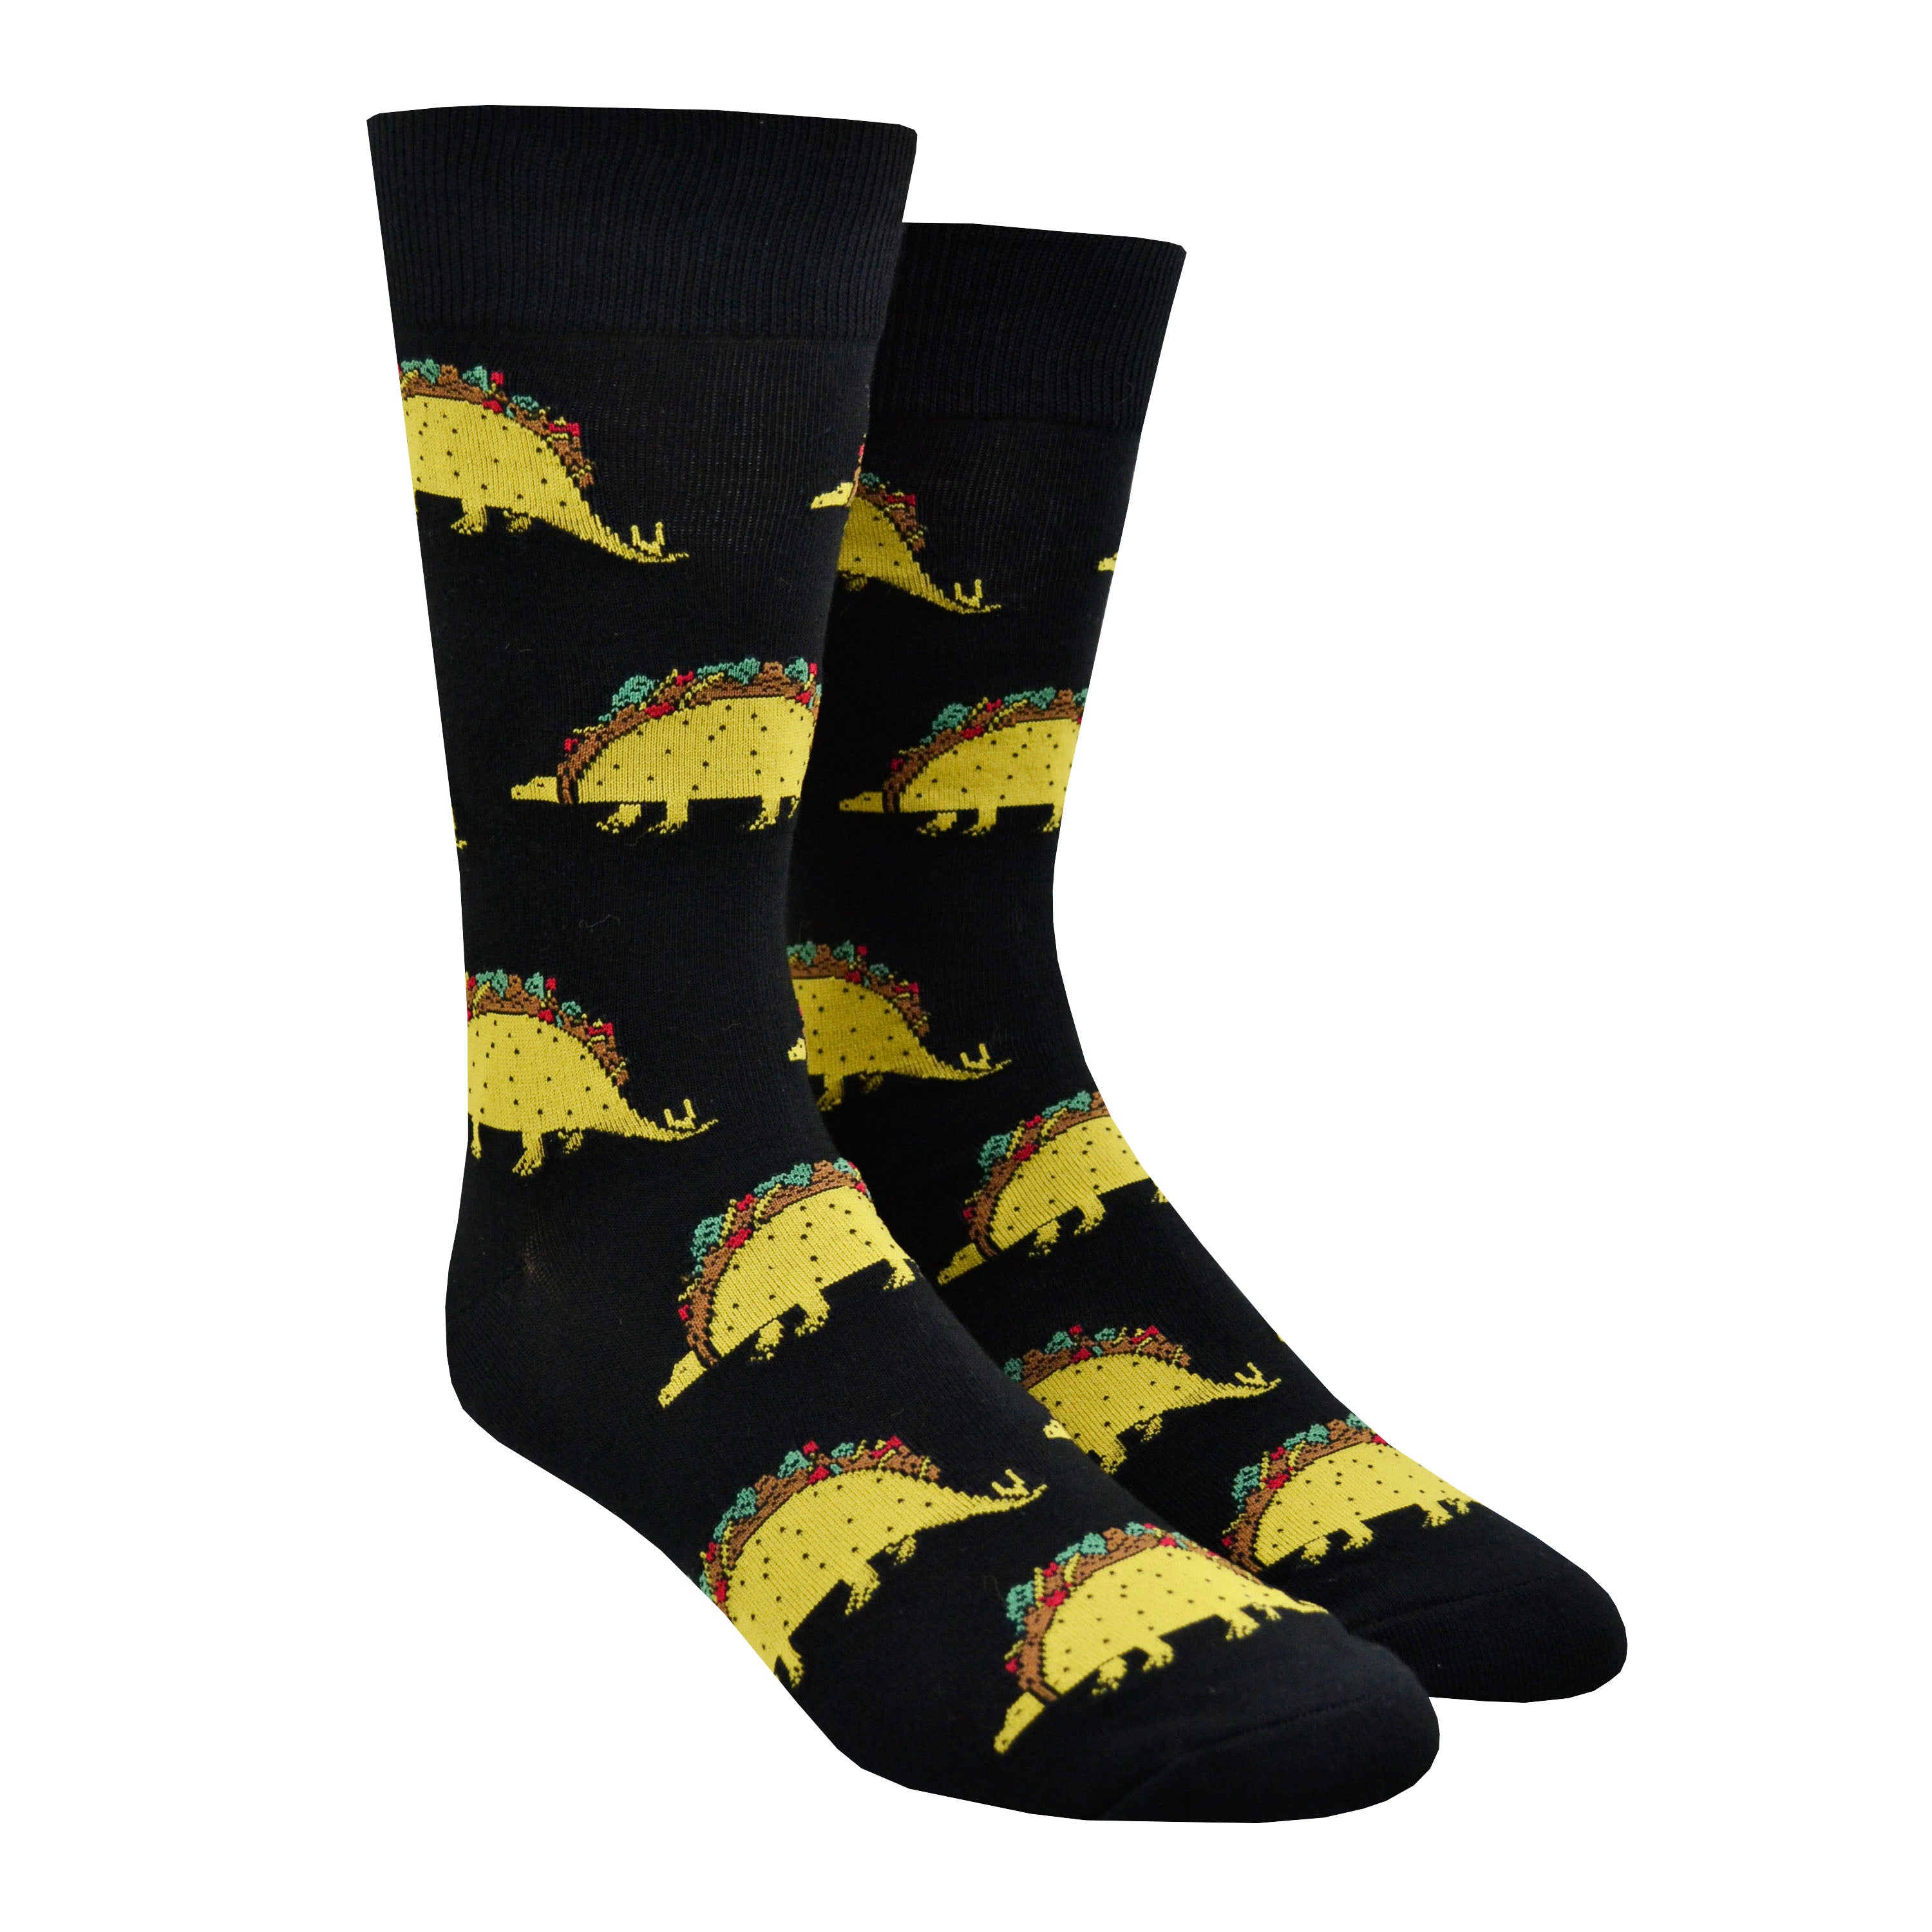 Shown on a leg form, these black cotton men's crew socks by the brand Sock It To Me feature dinosaurs with bodies that look like a taco.